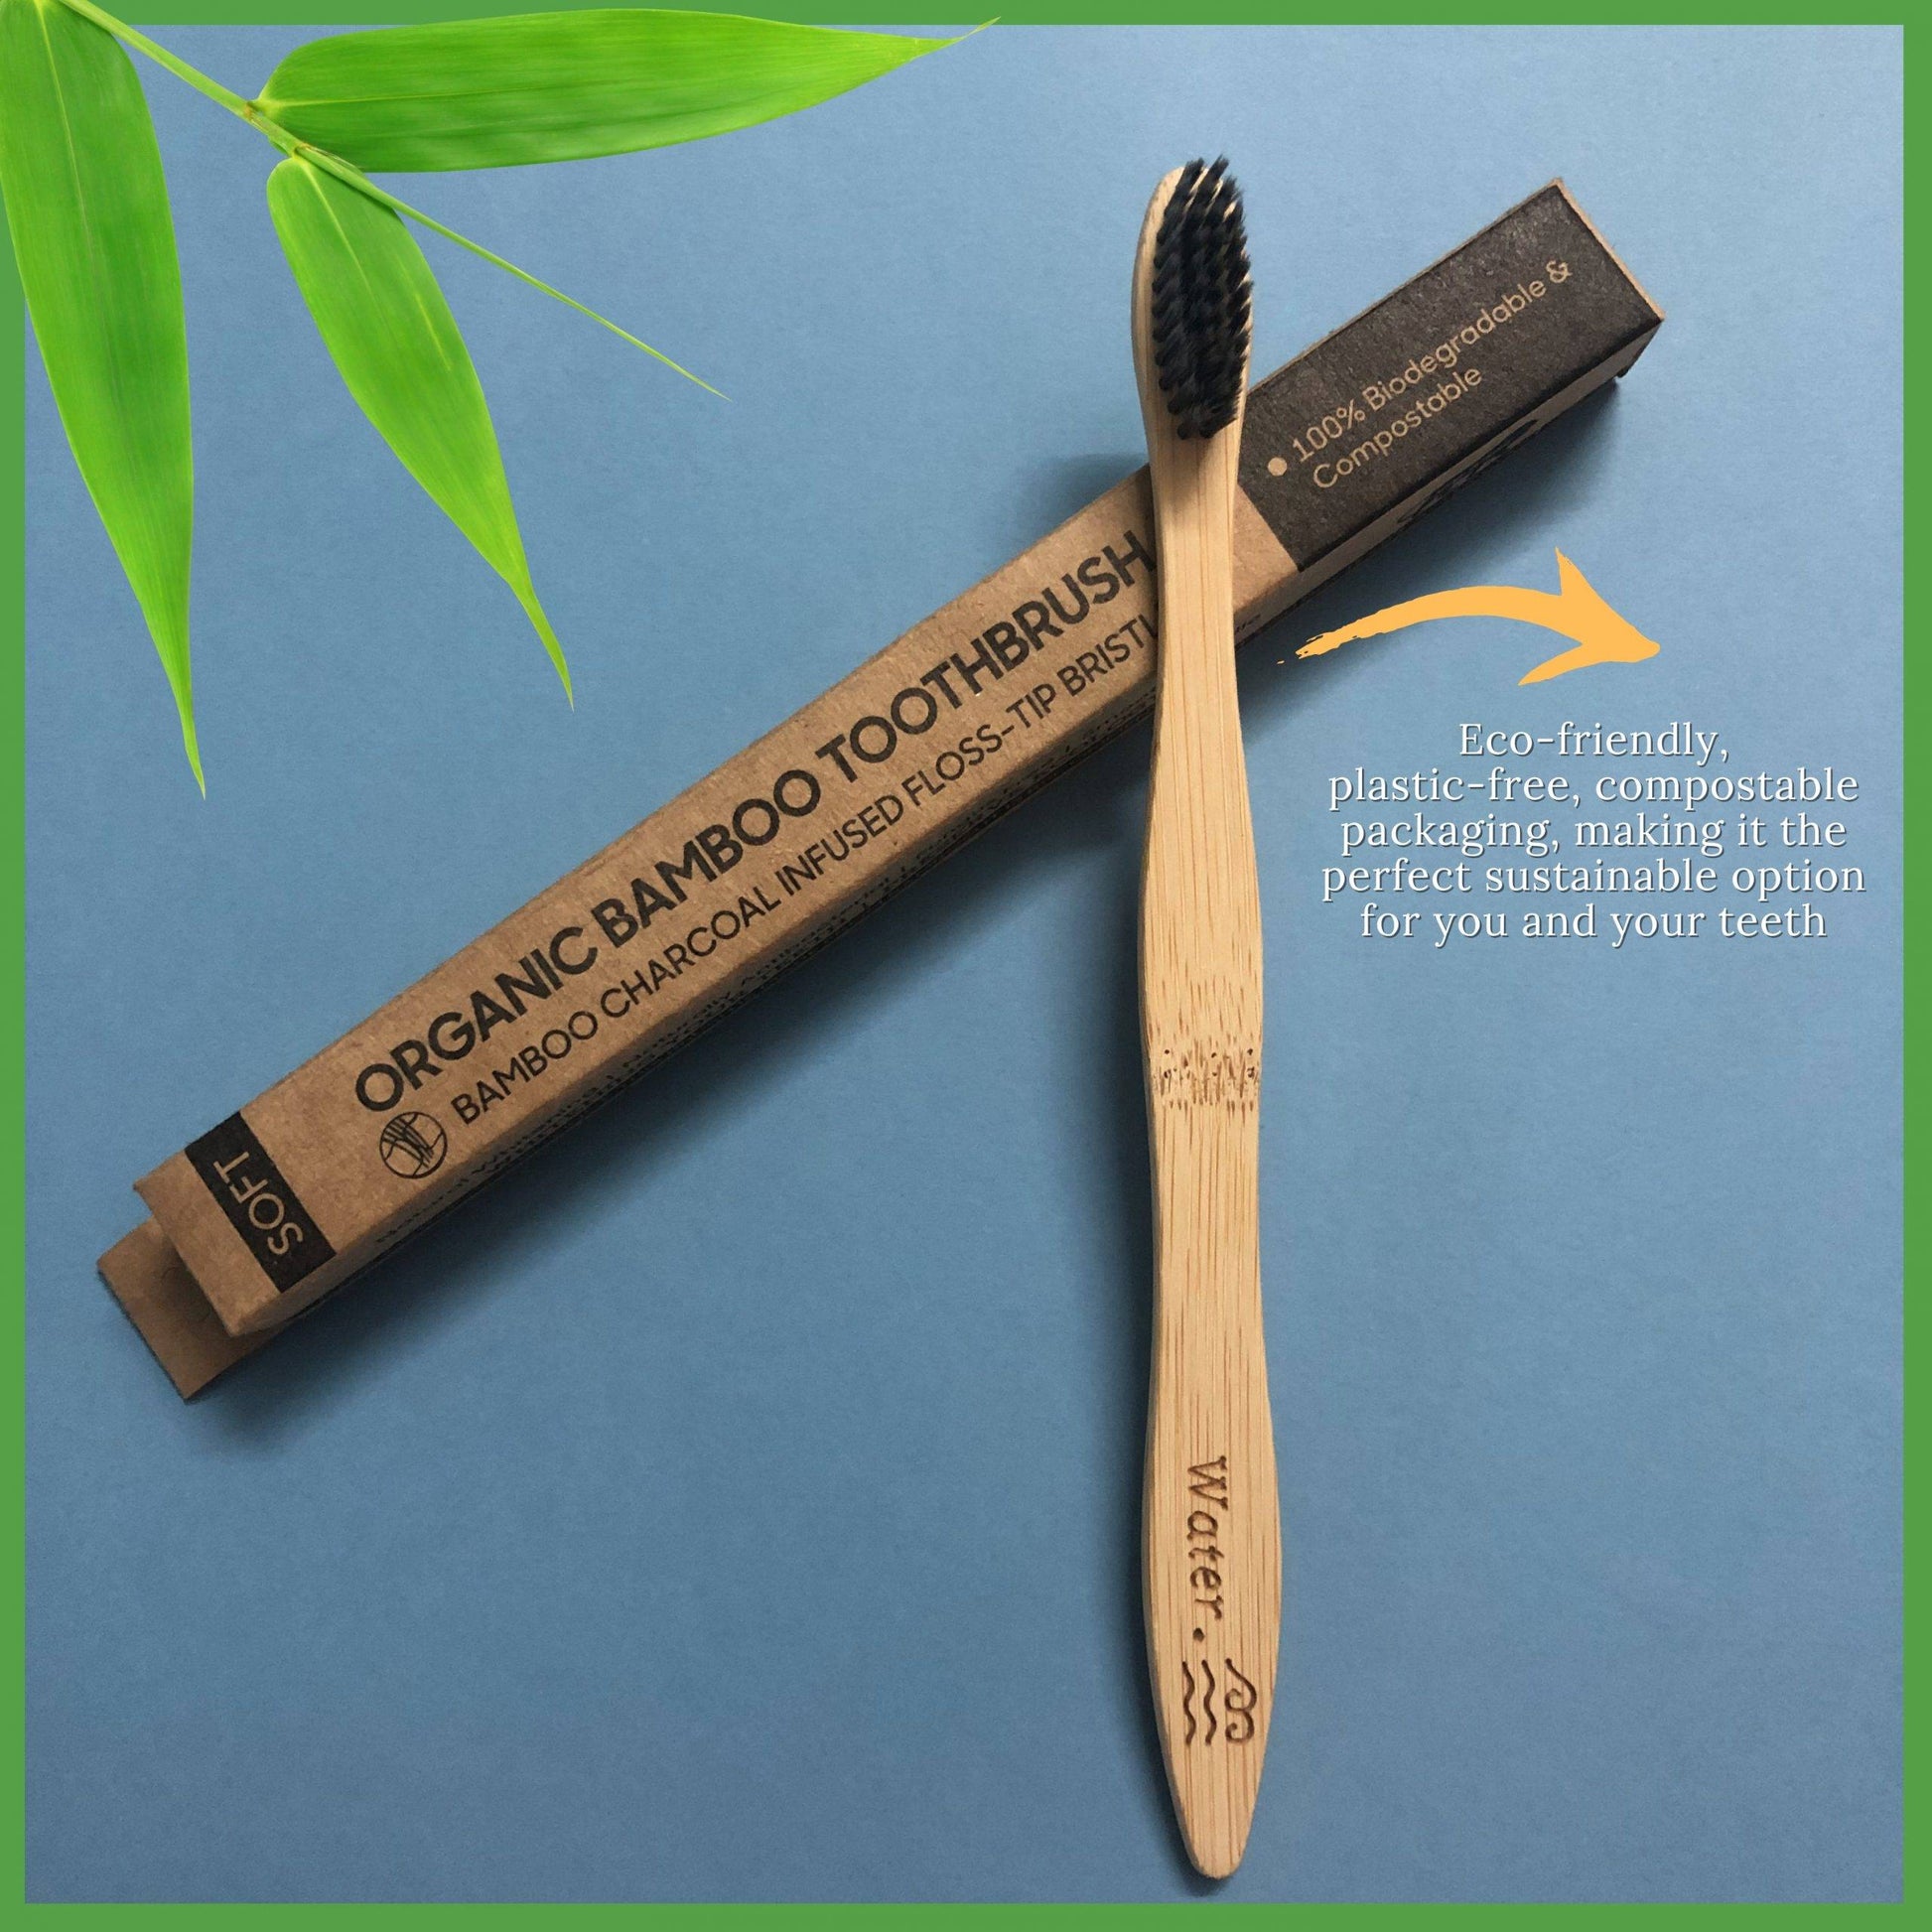 Eco-friendly, Plastic-free, Compostable packaging of our 100% Biodegradable Bamboo Toothbrush with Soft Charcoal-activated Bristles